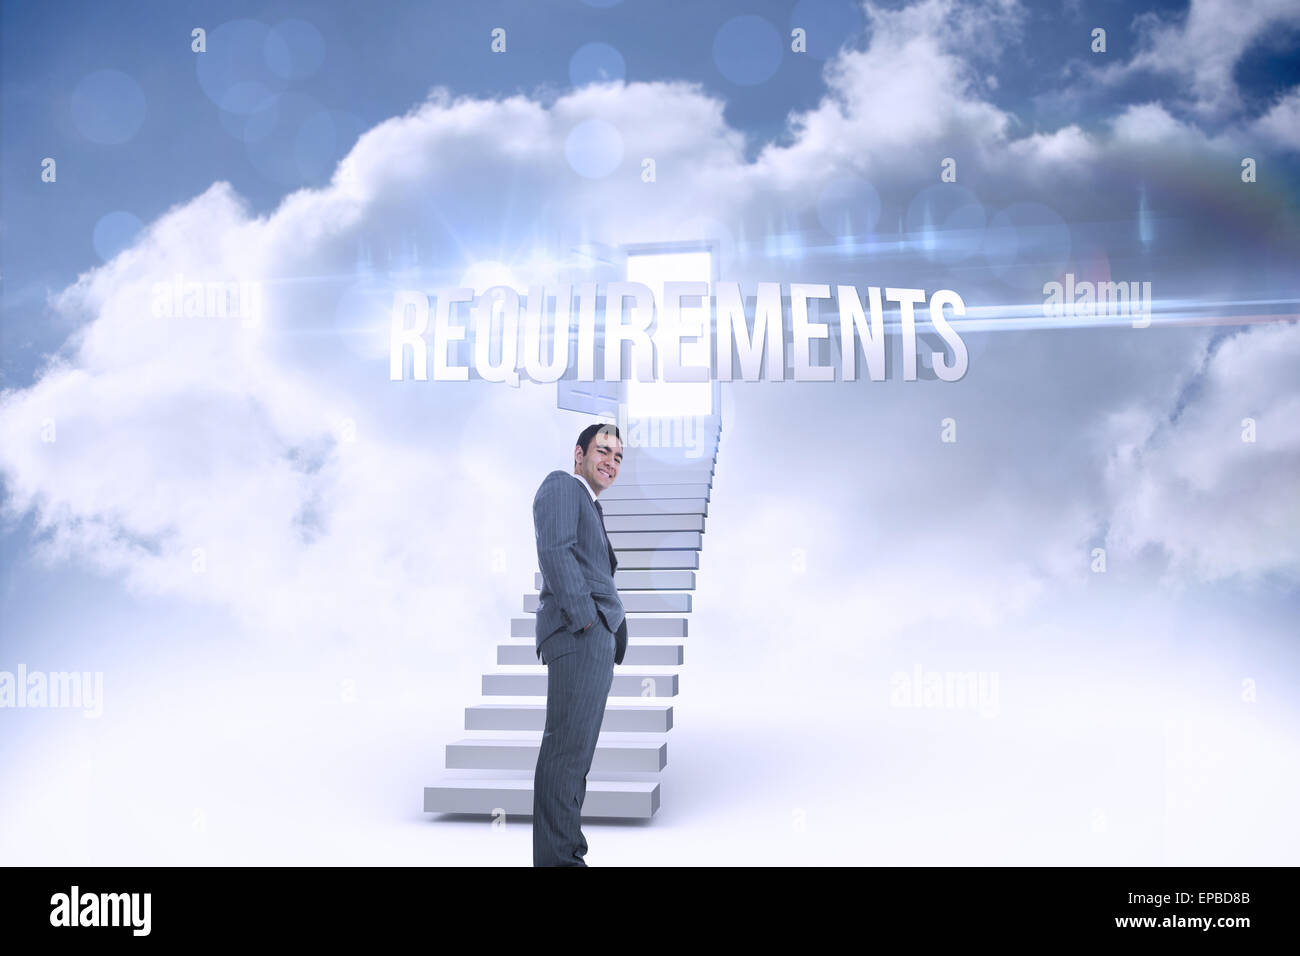 Requirements against open door at top of stairs in the sky Stock Photo